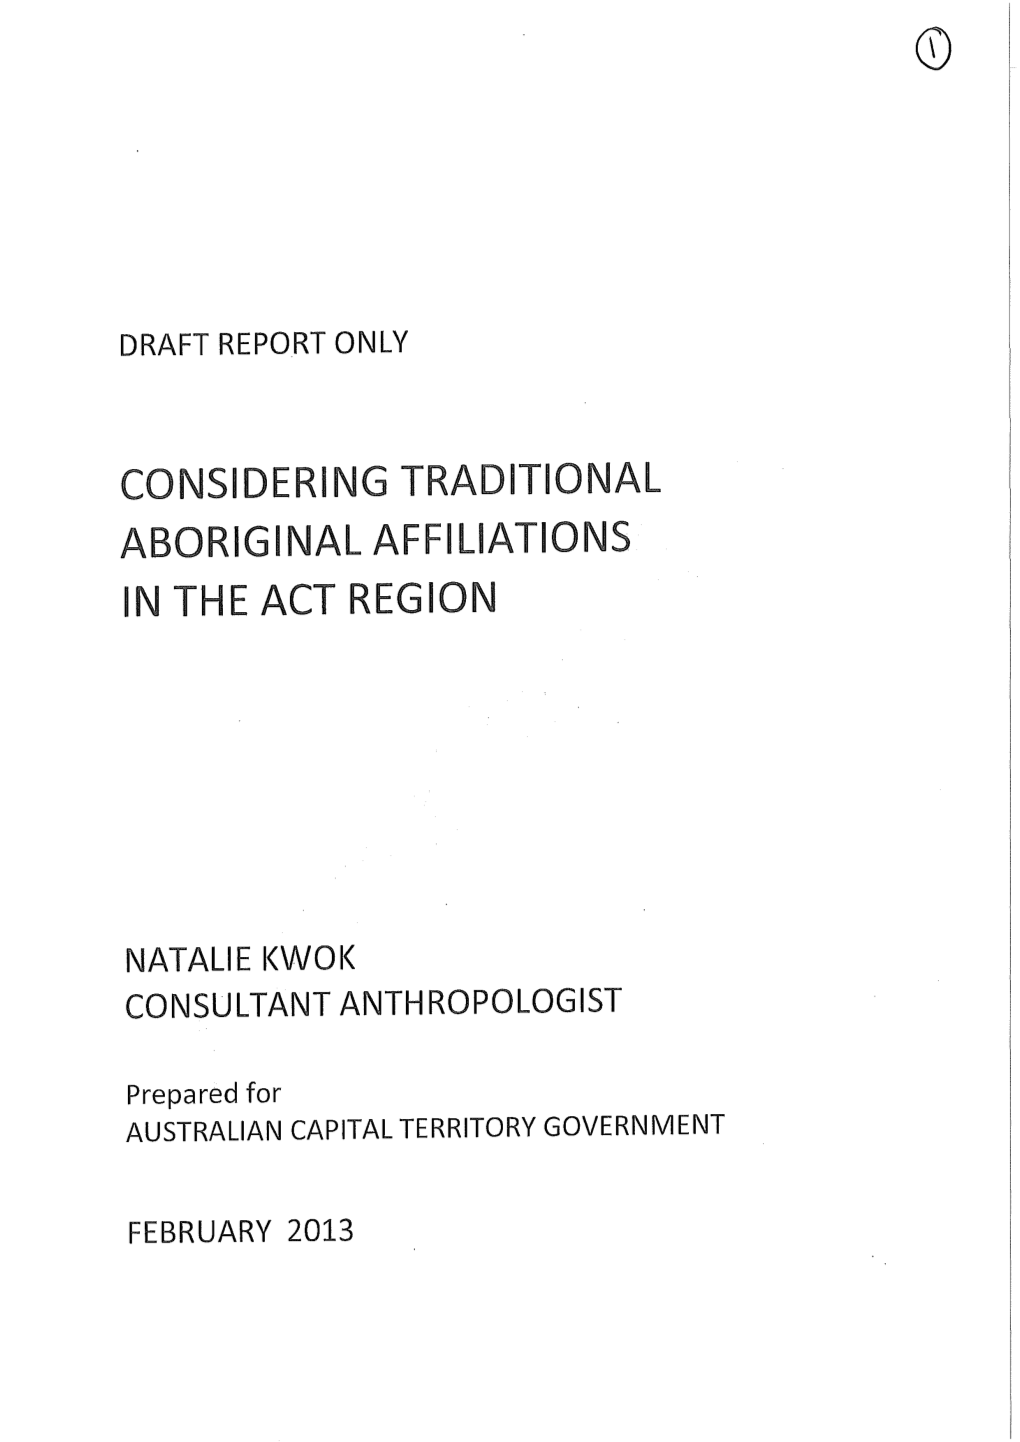 Considering Traditional Aboriginal Affiliations in the Act Region